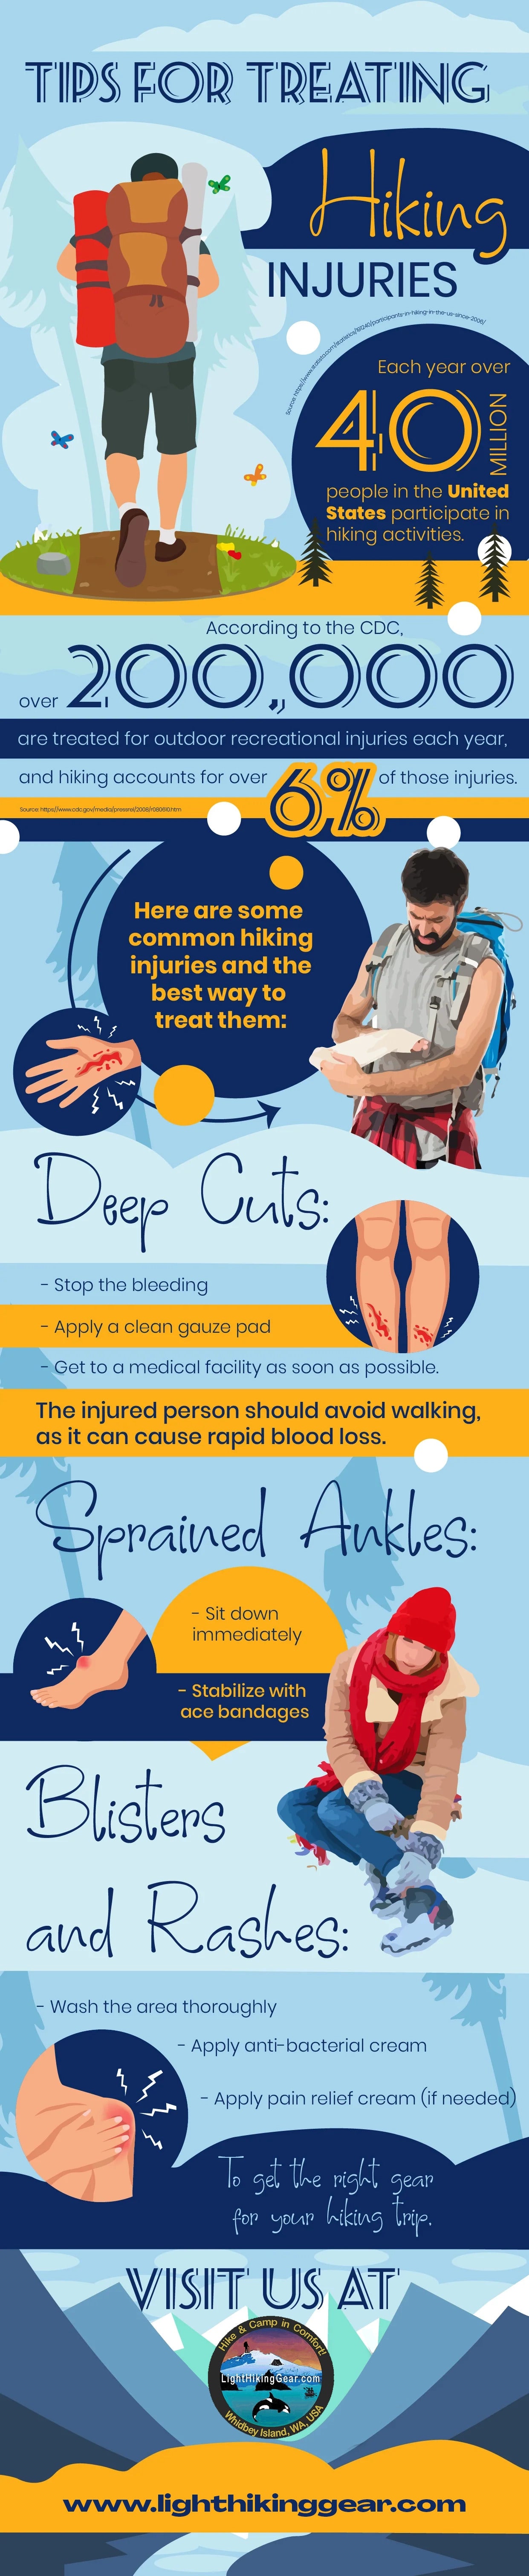 Tips For Treating Hiking Injuries